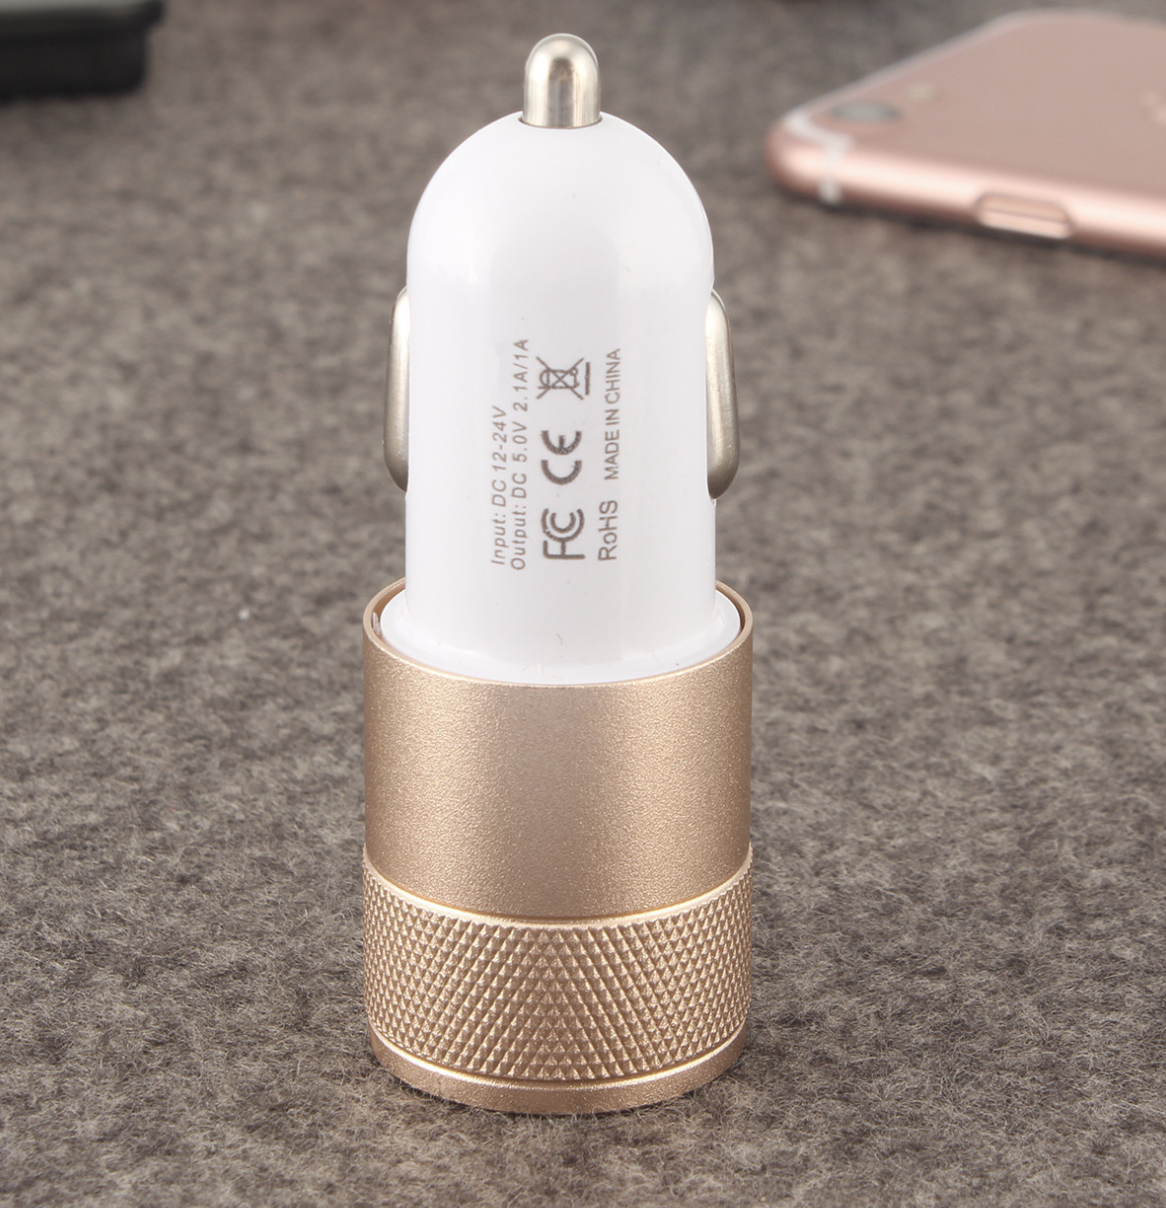 Shenzhen Factory Supply Aluminum 12V Car Battery Charger Emergency Dual USB Car Charger For Mobile Tablet